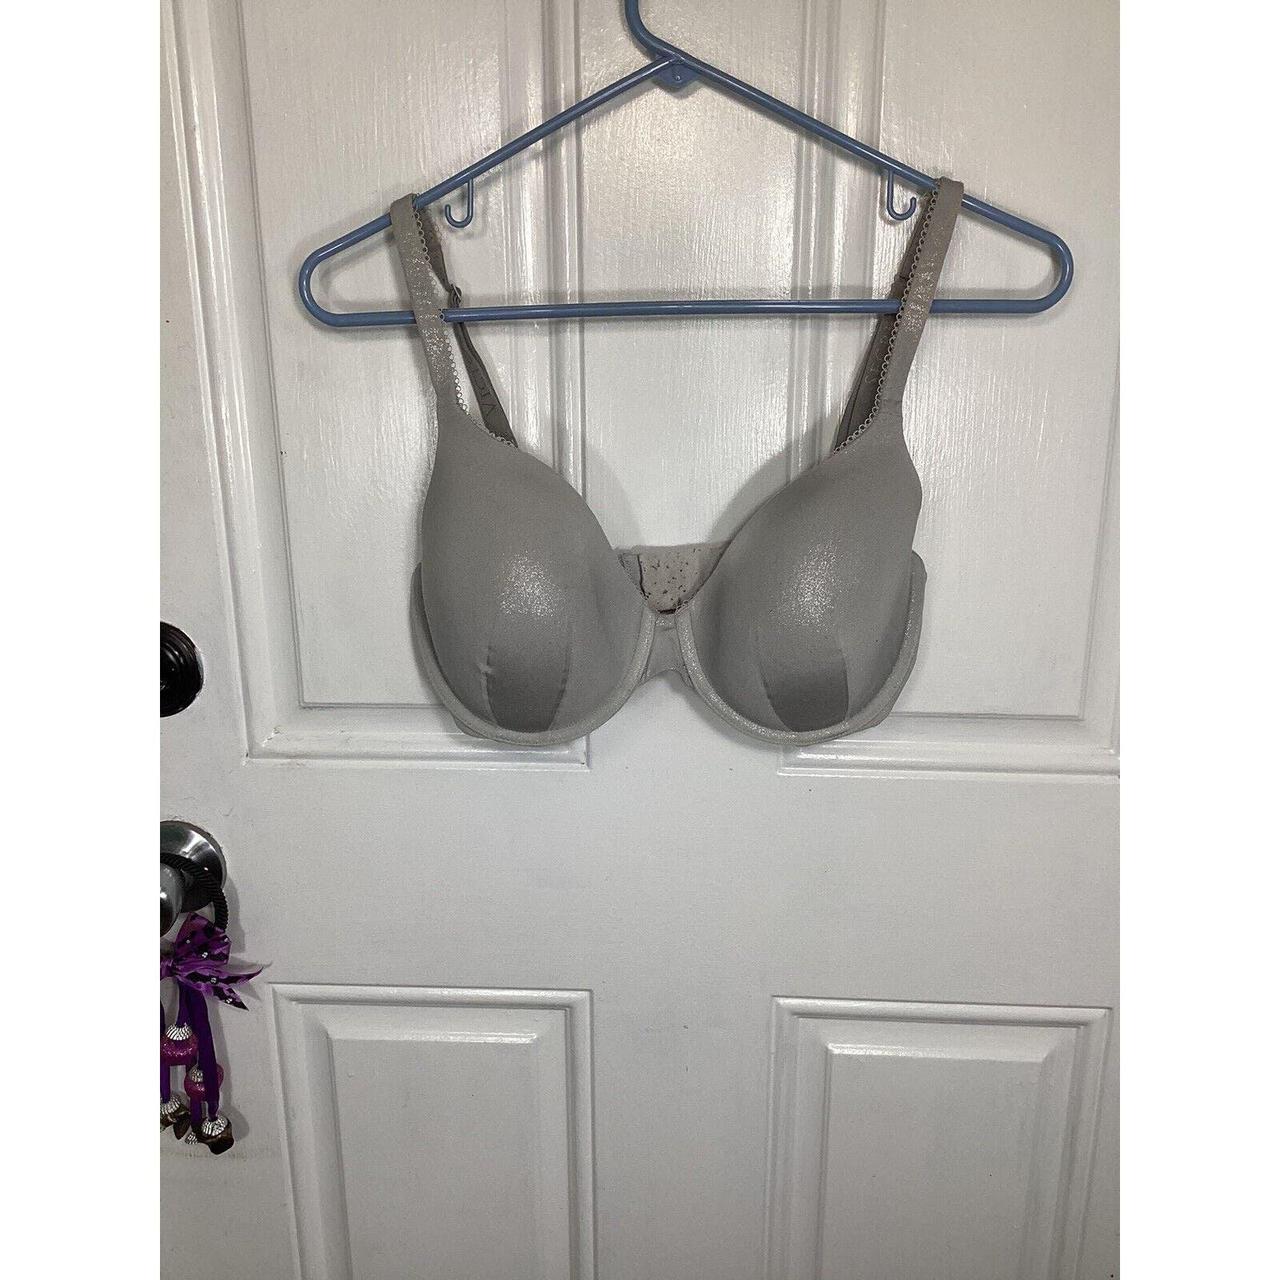 Underwire 32DDD, Bras for Large Breasts